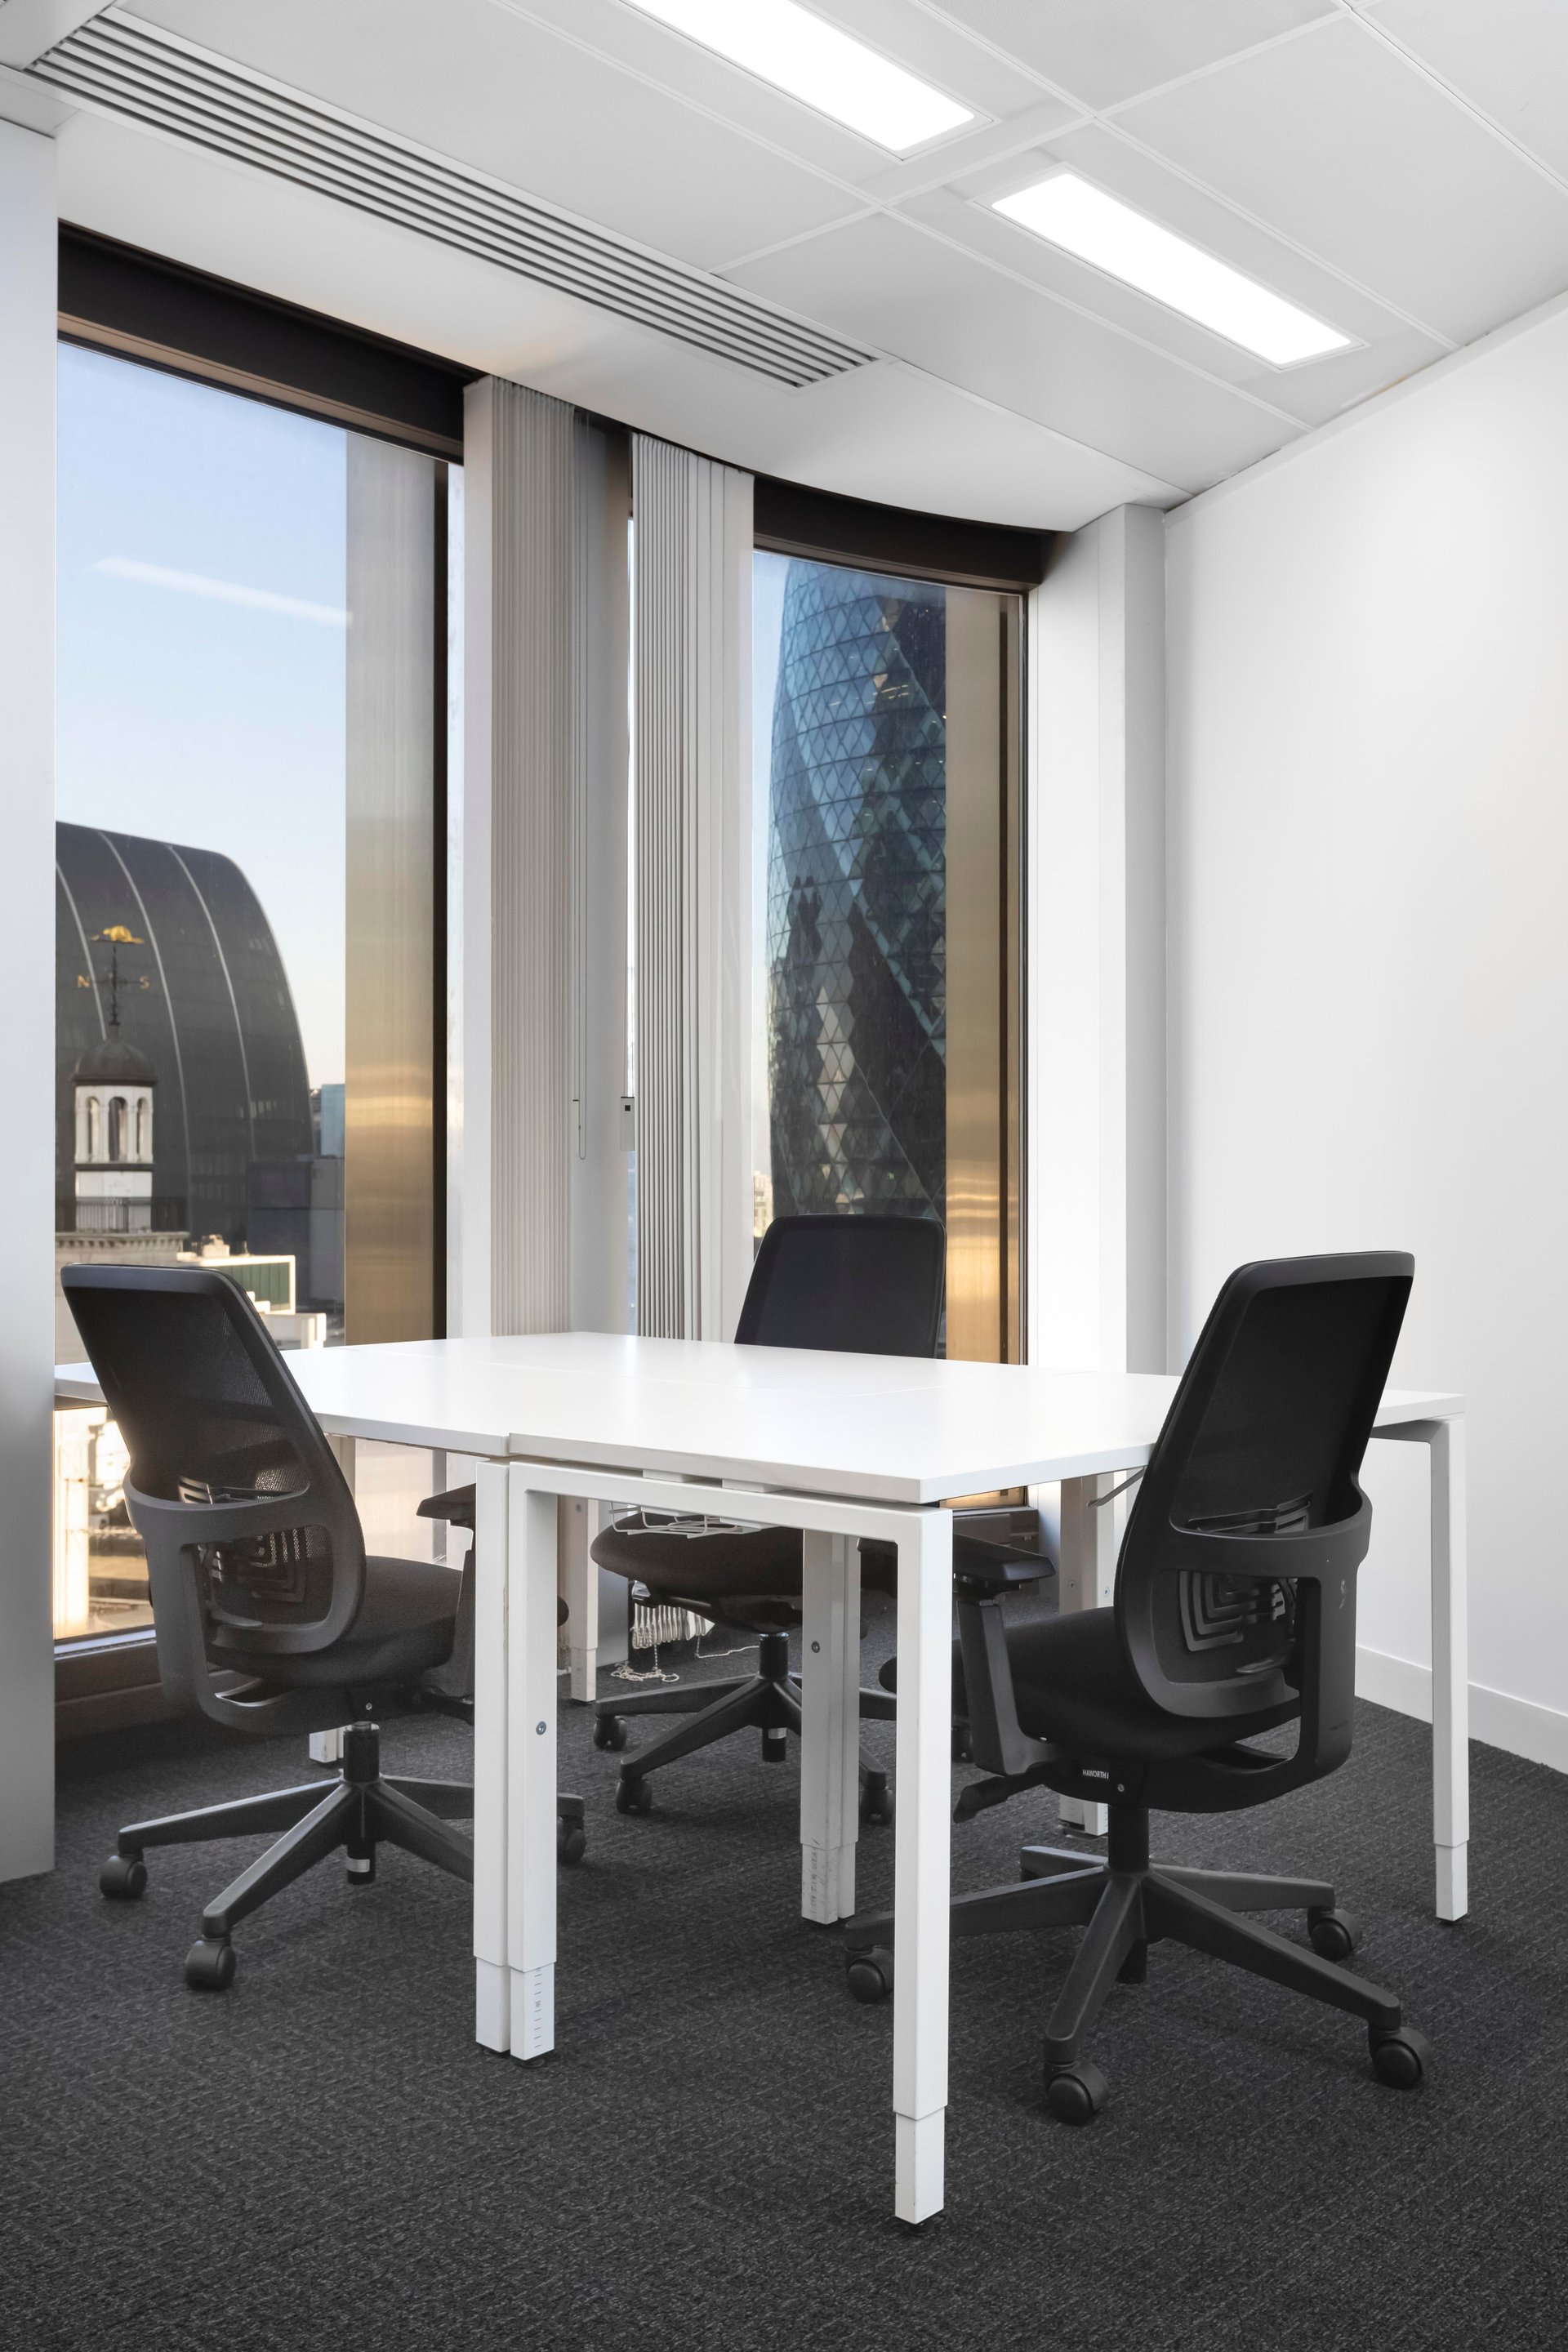 Signature - Tower 42 beltere